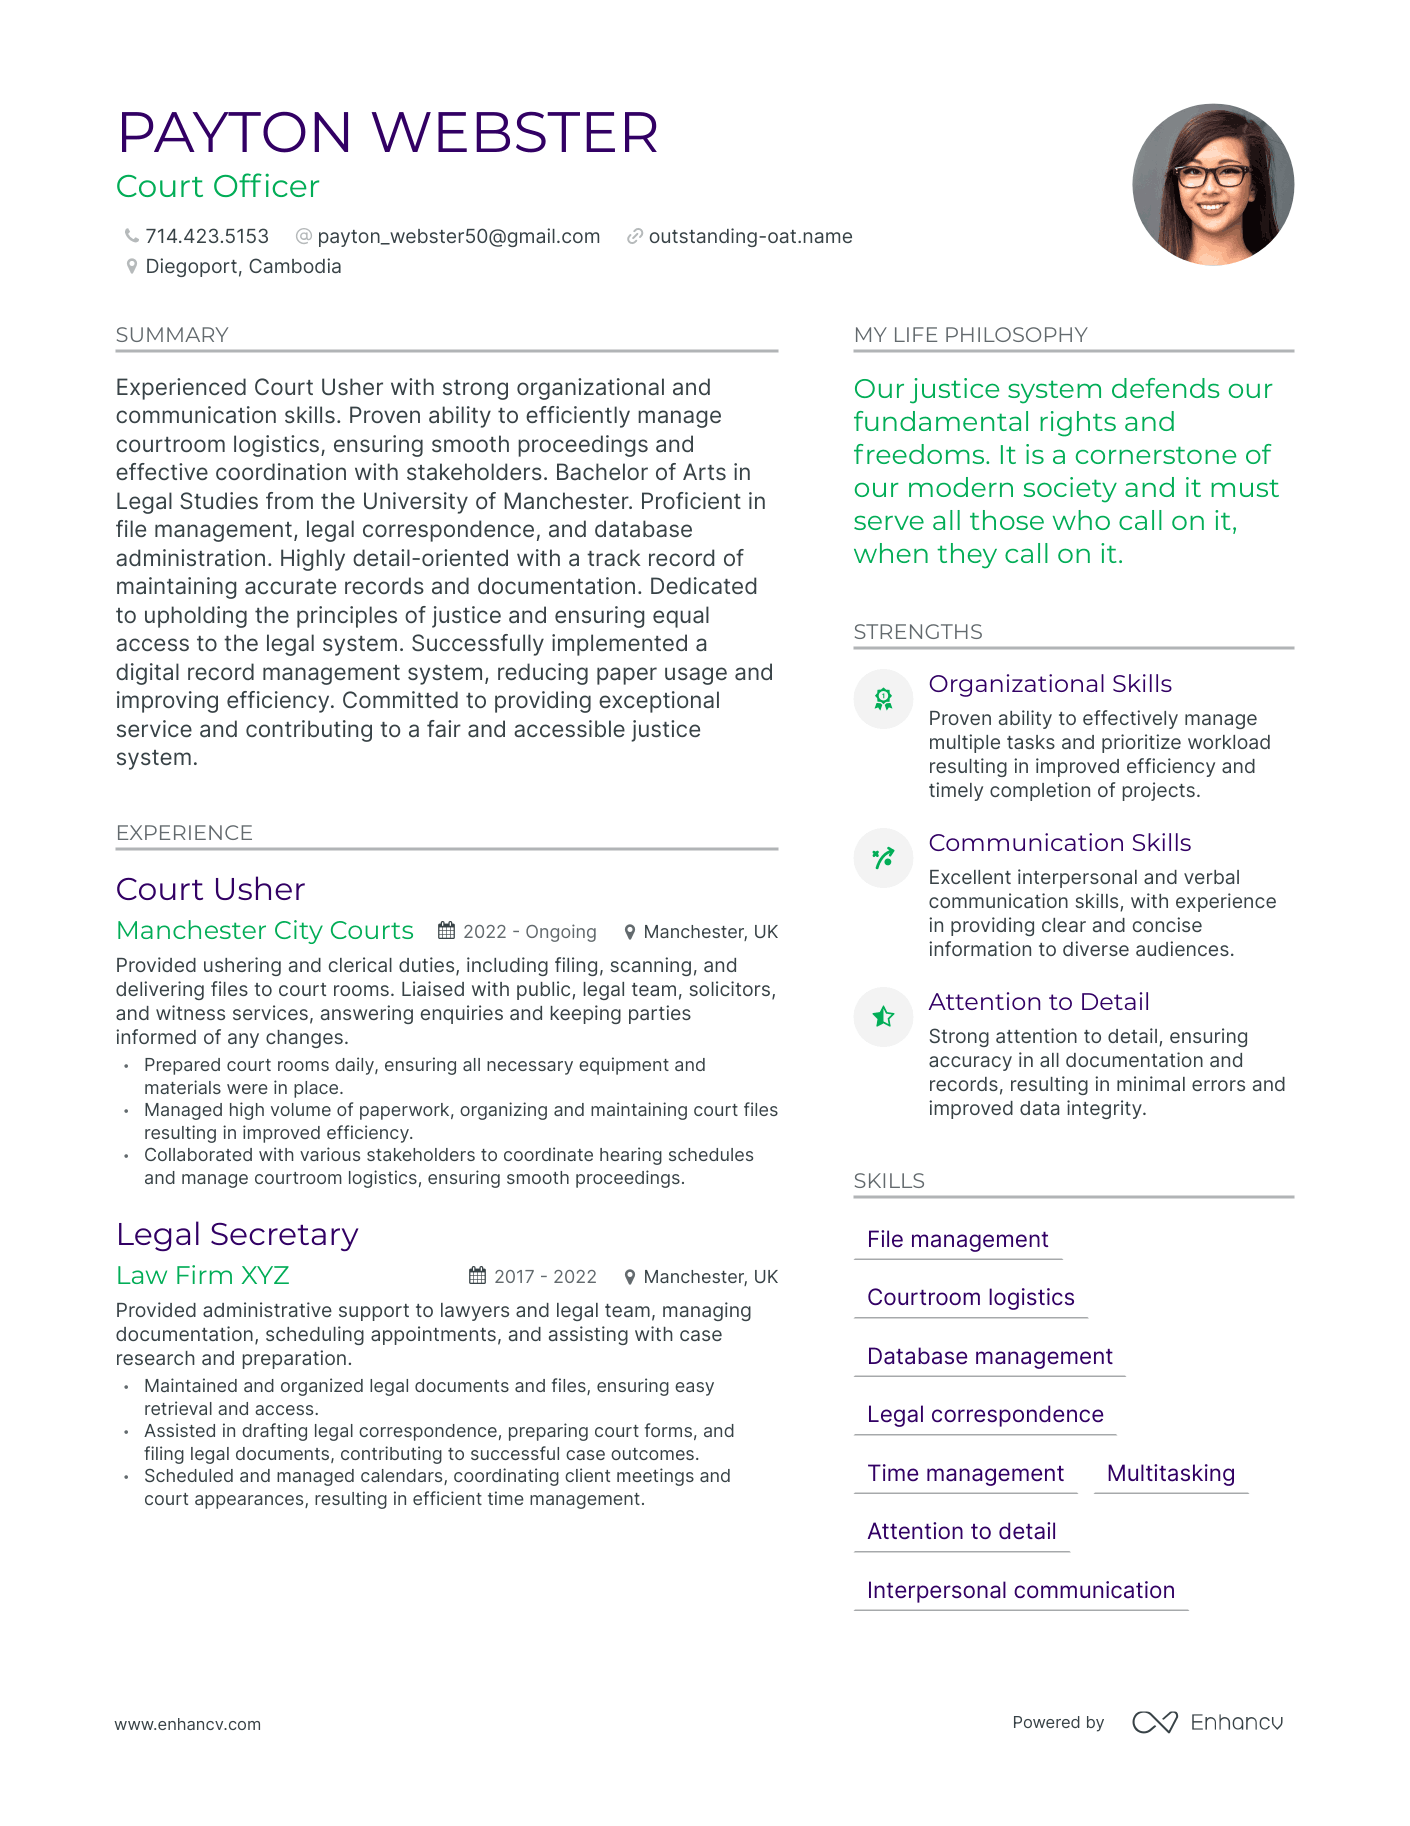 Court Officer resume example